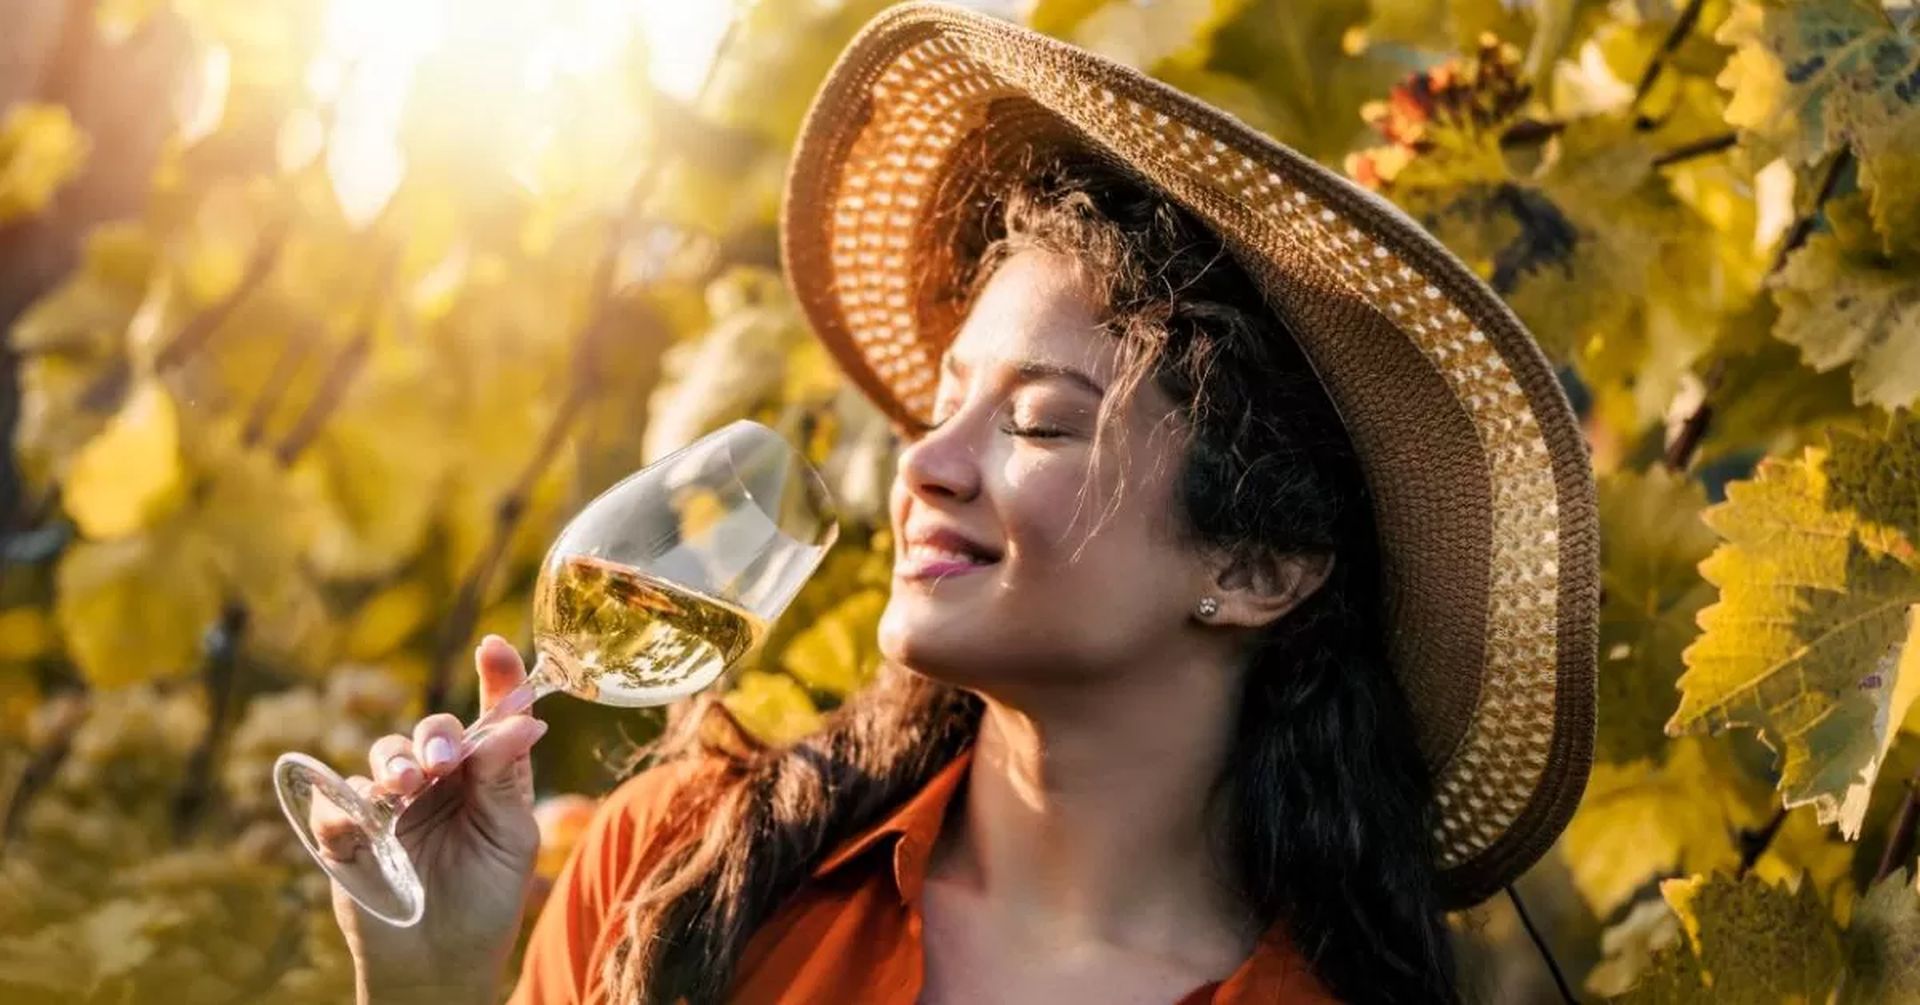 Greek wine earned its bad reputation in the ‘60s and ‘70s when “retsina” was served to tourists. Back then, people added pine resin into white wine to cover any faults and presented it as our national drink you cannot miss. 